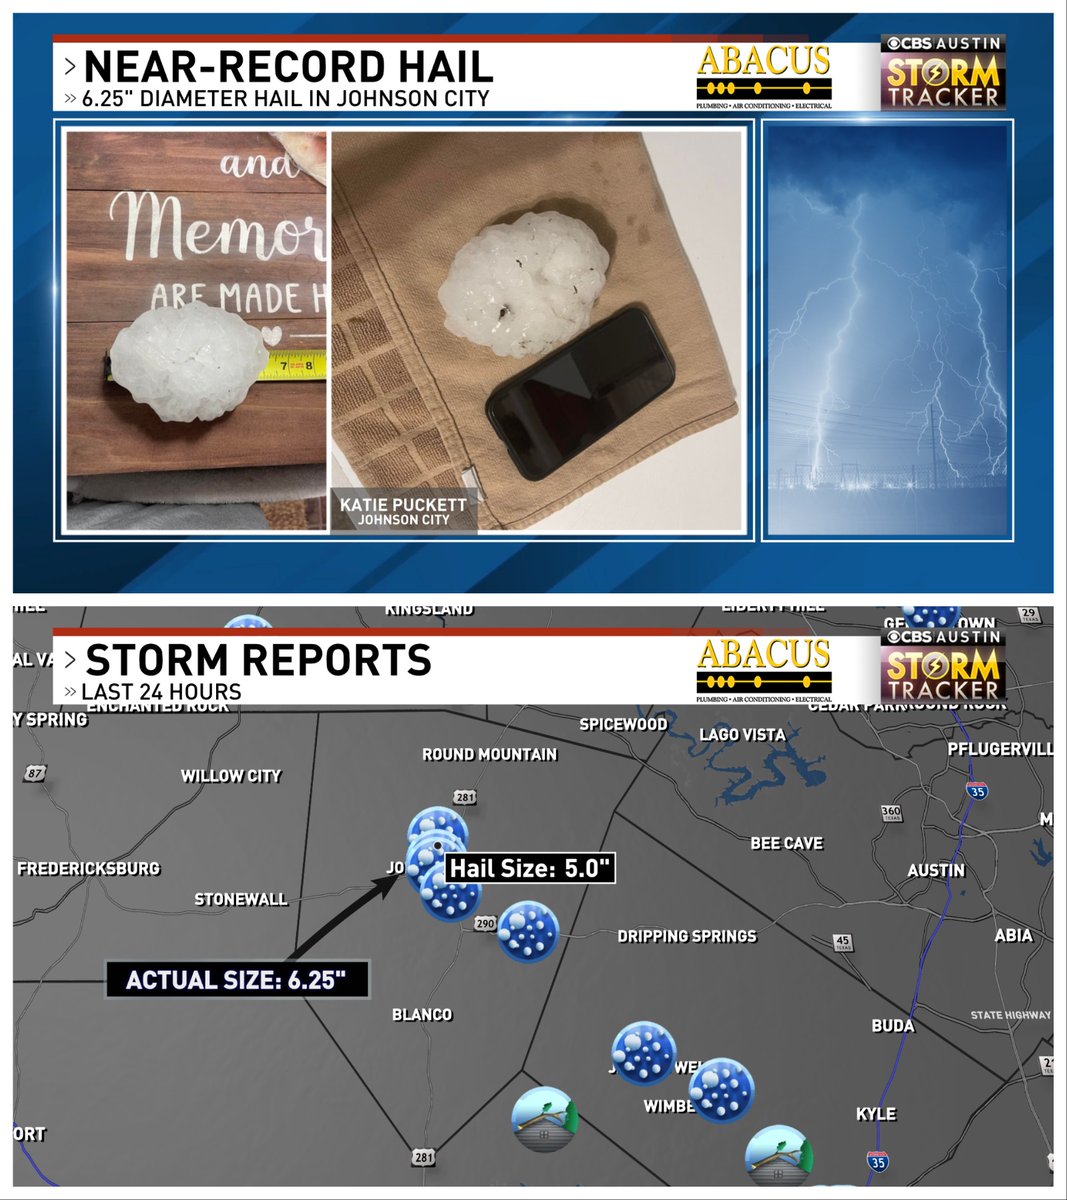 Last night's hail in Johnson City was quite literally off the charts. Evidently, the maximum hail size that the National Weather Service can put in a storm report is 5'... The iPhone-sized hail there was actually 6.25' in diameter #atxwx #txwx